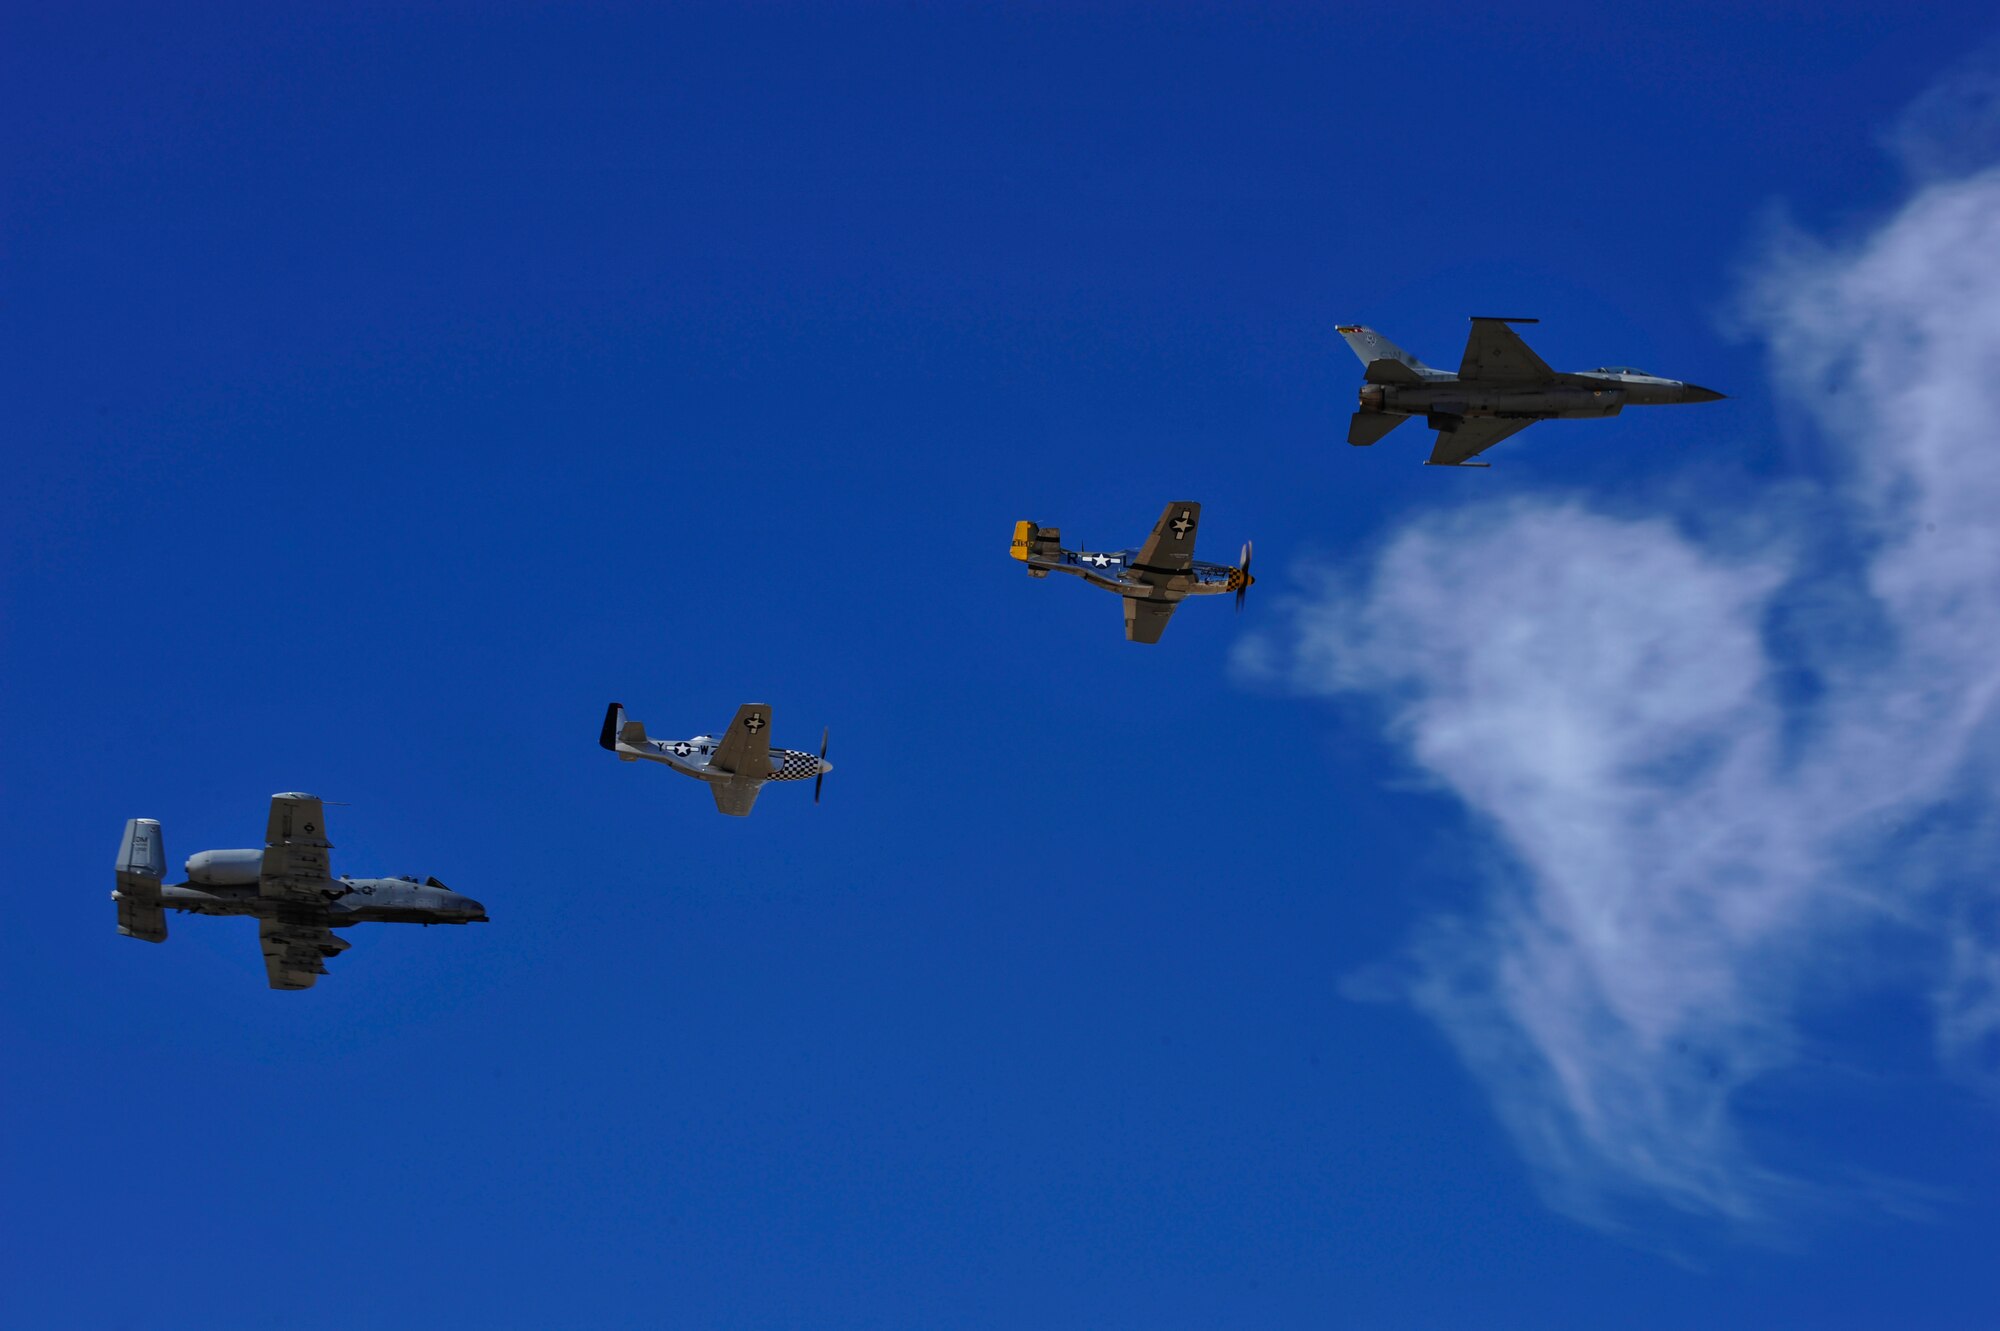 A U.S. Air Force A-10C Thunderbolt II, F-16 Fighting Falcon and two TF-51 Mustangs fly together during the 2017 Heritage Flight Training and Certification Course at Davis-Monthan Air Force Base, Ariz., Feb. 11, 2017. The HFTCC provides civilian and military pilots the opportunity to practice flying in formation together in preparation for future air shows. (U.S. Air Force photo by Senior Airman Cheyenne A. Powers)